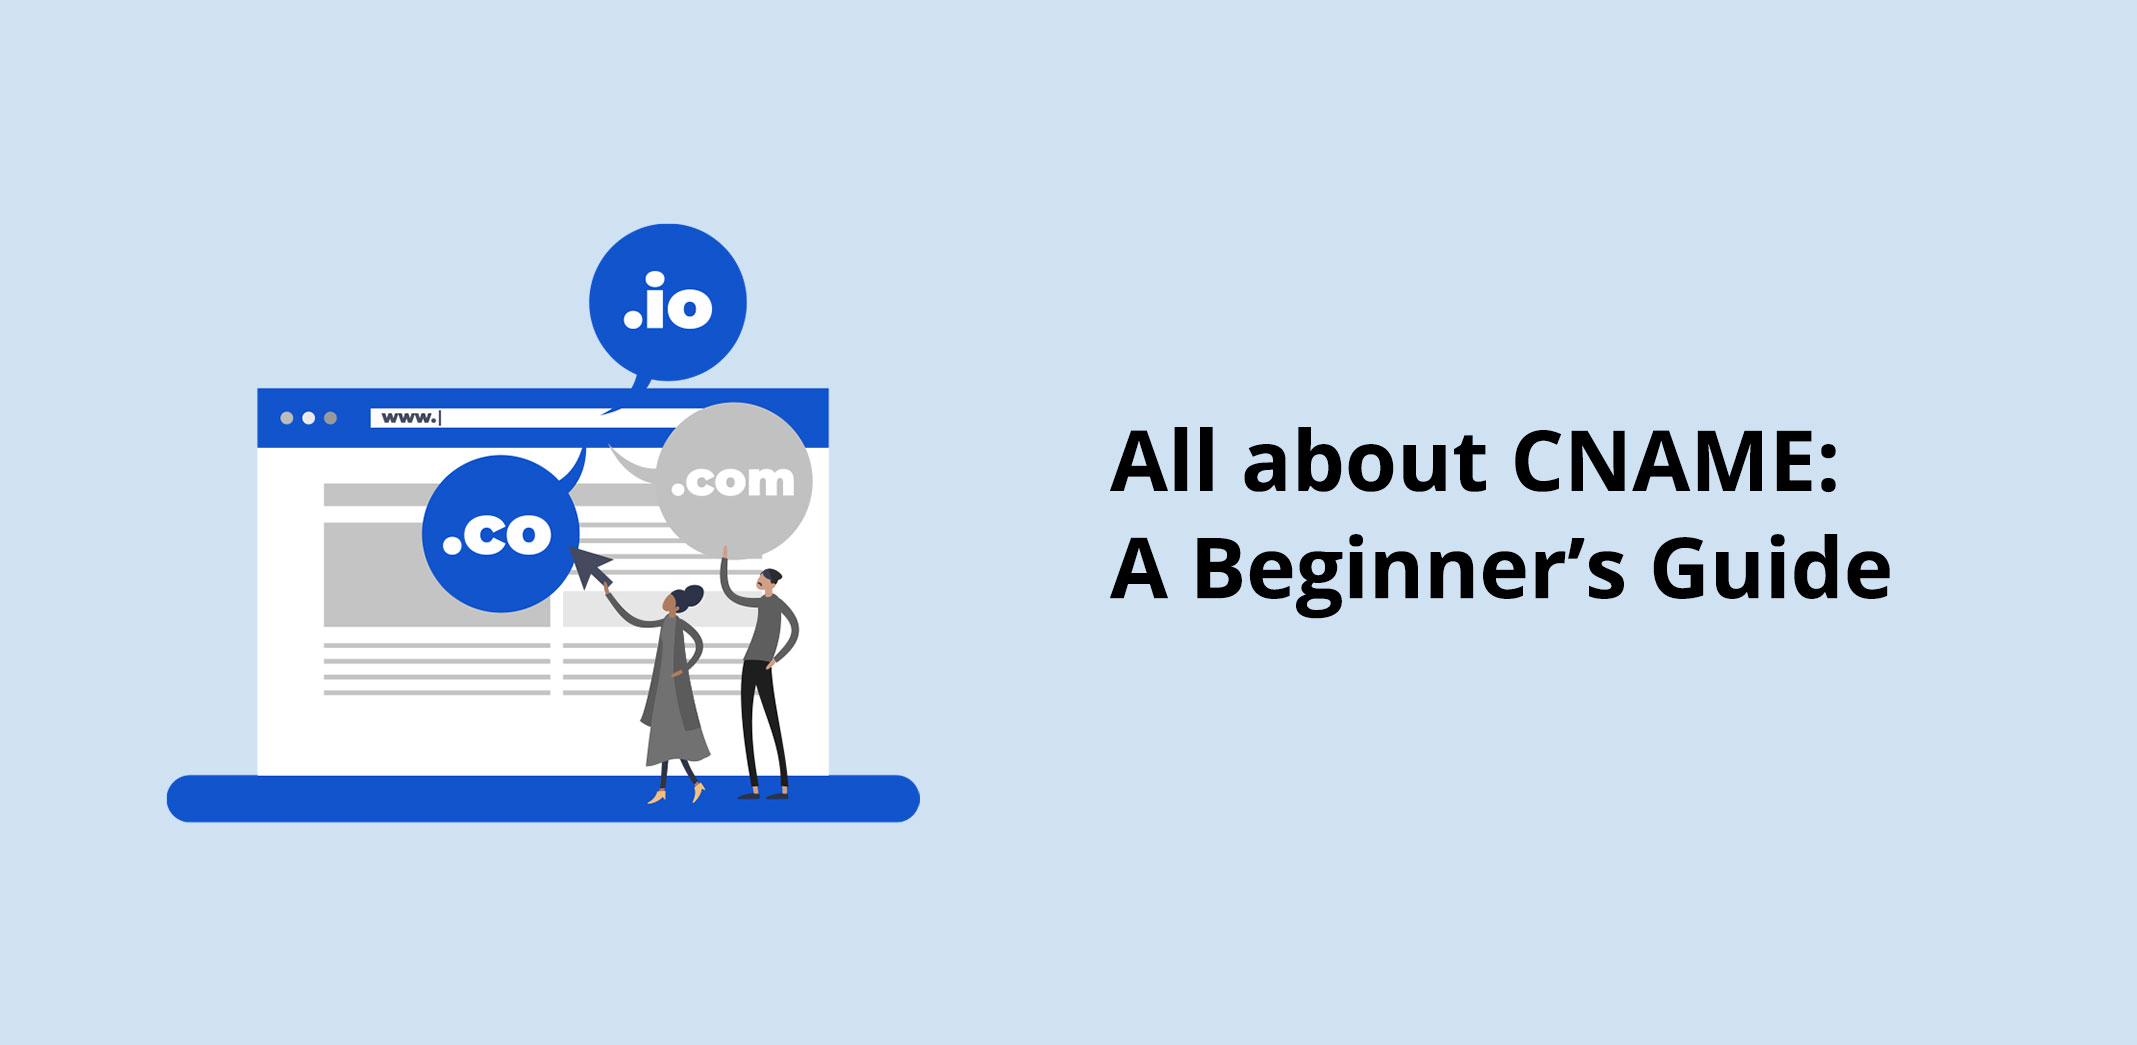 All about CNAME: A Beginner’s Guide